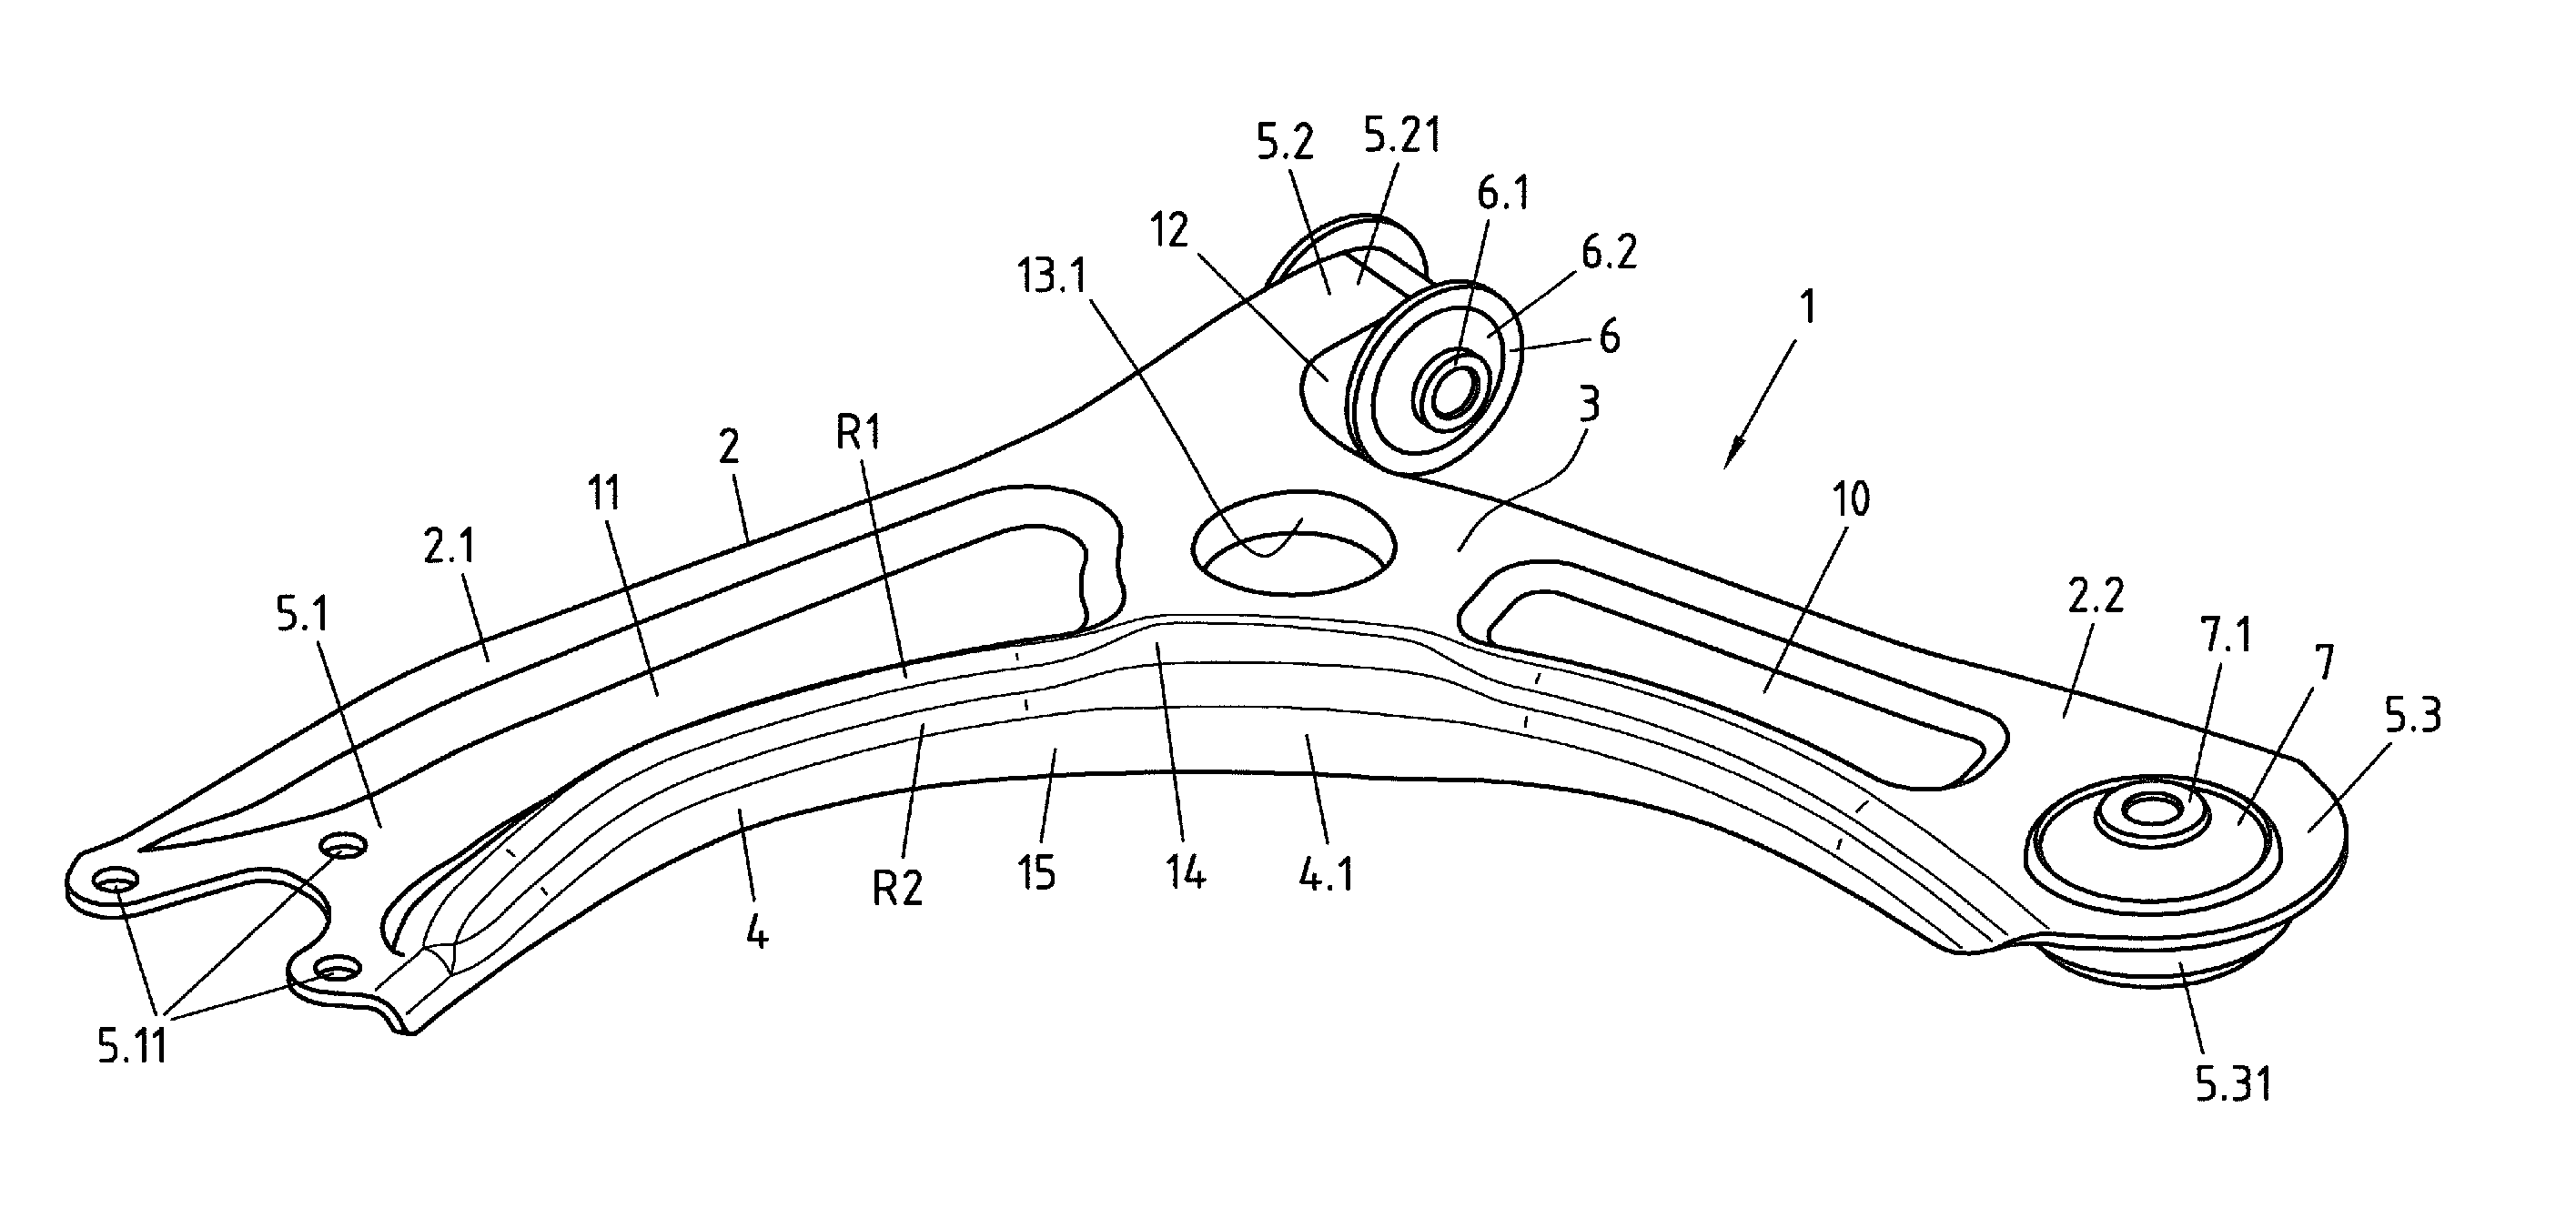 Method for Producing a Chassis Link